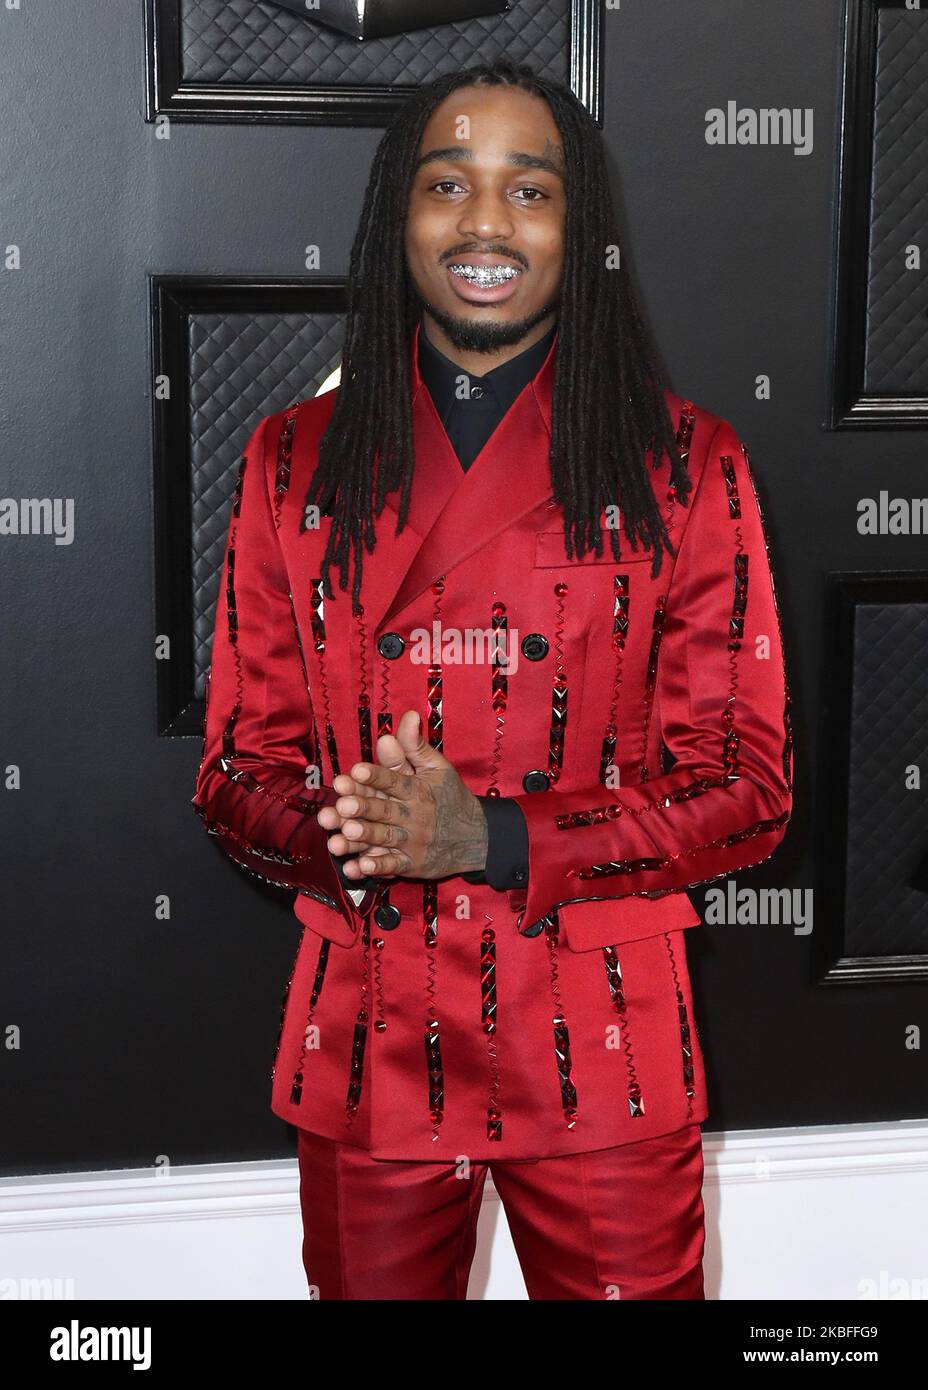 LOS ANGELES, CALIFORNIA, USA - JANUARY 26: Quavo arrives at the 62nd Annual GRAMMY Awards held at Staples Center on January 26, 2020 in Los Angeles, California, United States. (Photo by Xavier Collin/Image Press Agency/NurPhoto) Stock Photo